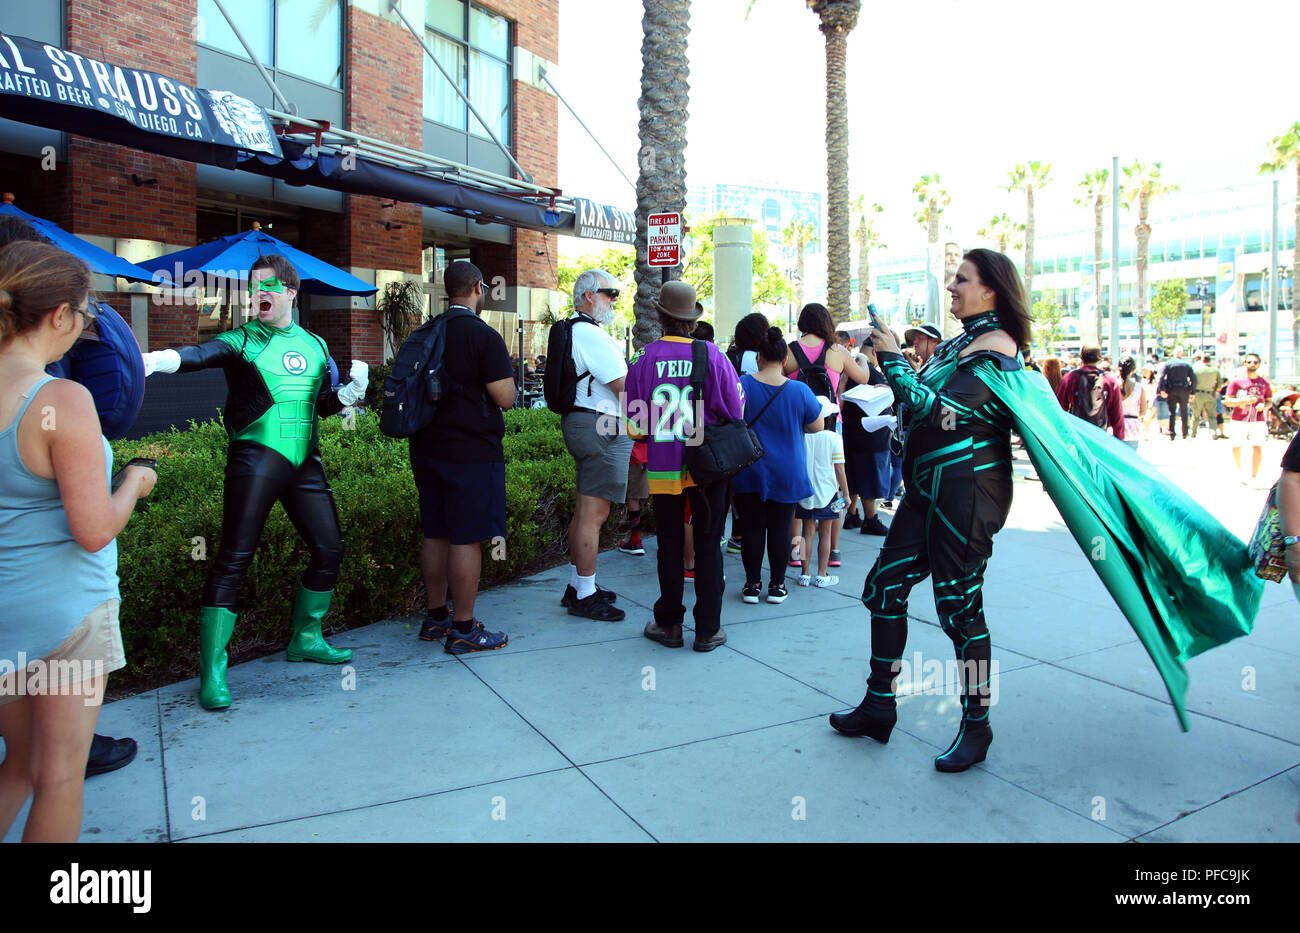 San Diego, California, USA. 22nd July, 2018. The grandaddy of annual comics conventions, this sci-fi/animation mecca has cosplay contests, screenings, & countless panels with artists and showrunners. Superheroes are taking pictures. Credit: Katrina Kochneva/ZUMA Wire/Alamy Live News Stock Photo